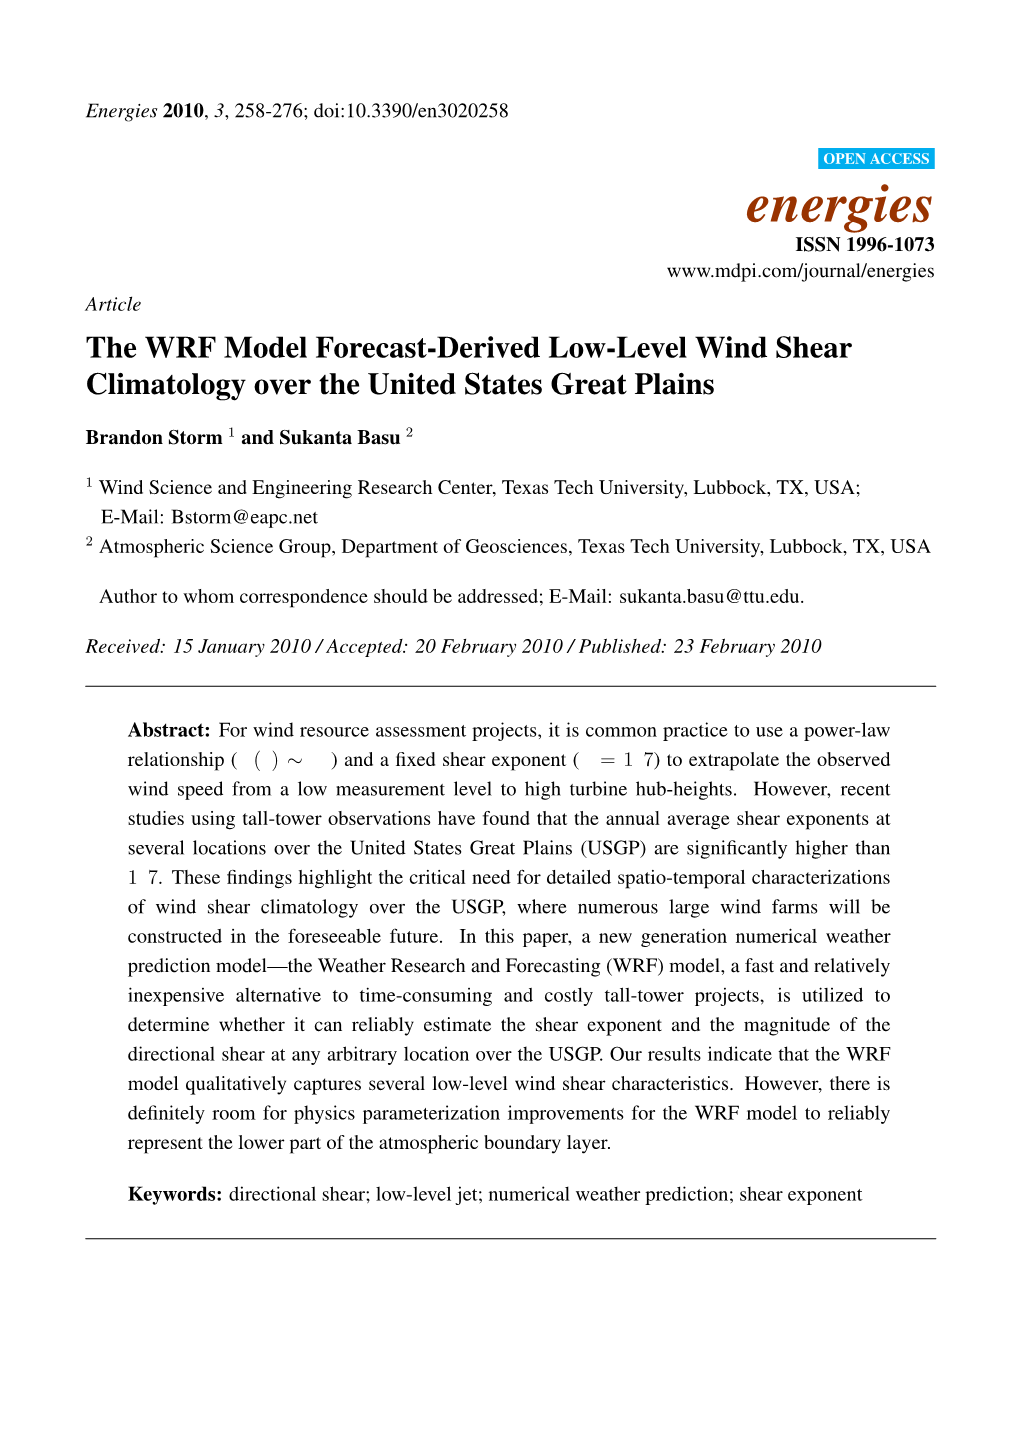 The WRF Model Forecast-Derived Low-Levelwind Shear